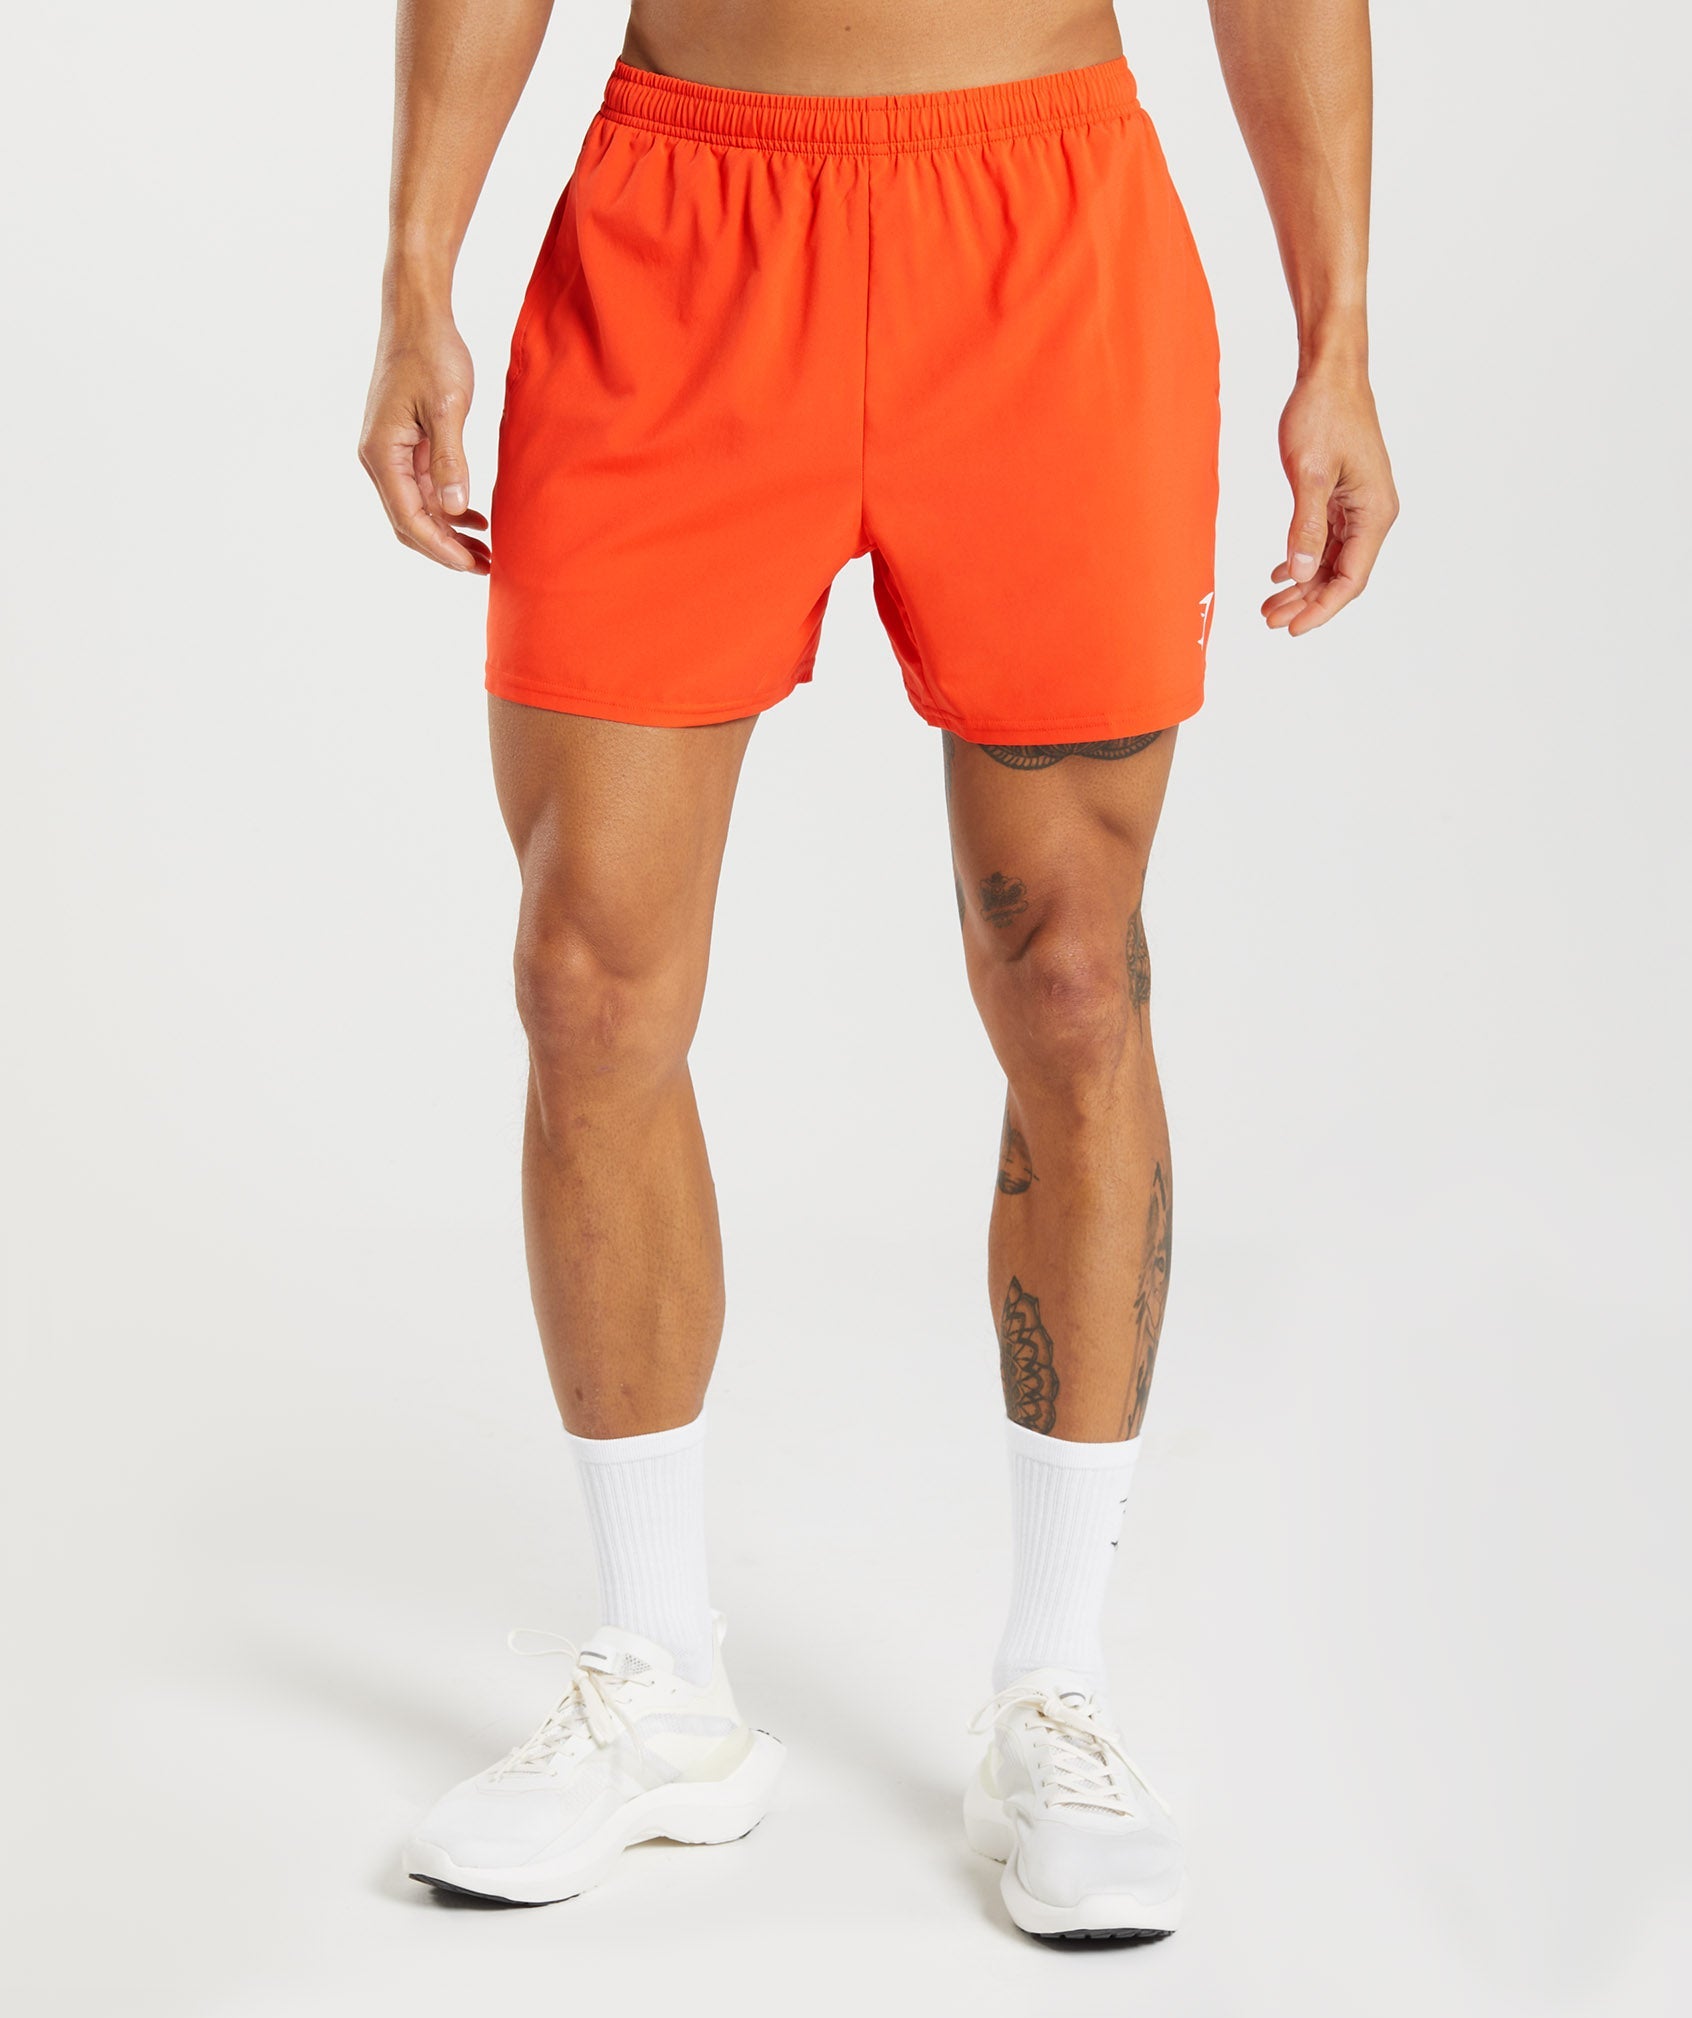 Arrival 5" Shorts in Pepper Red